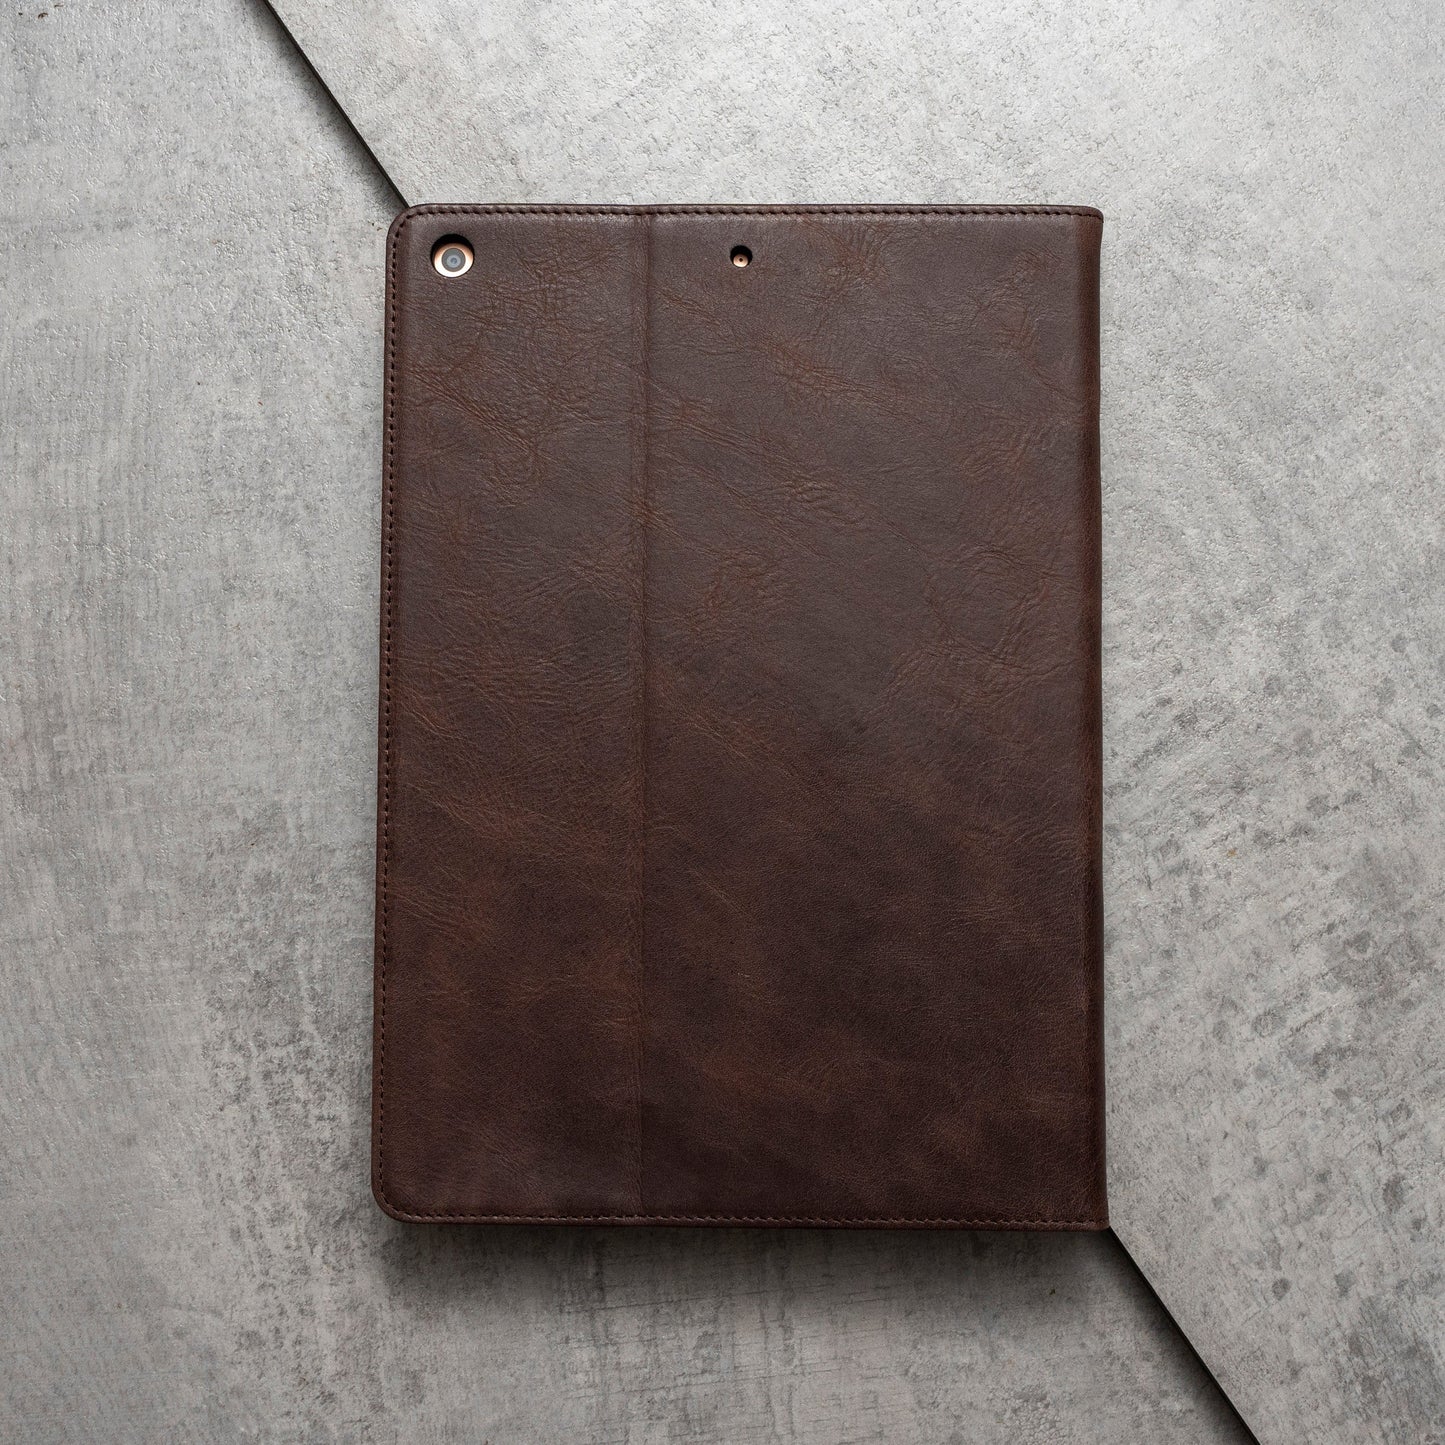 iPad Pro 11" 4th, 3rd, 2nd & 1st Gen - 2022 / 2021 / 2020 / 2018 Release. Premium Genuine Leather Stand/Cover/Flip Case (Chocolate Brown)